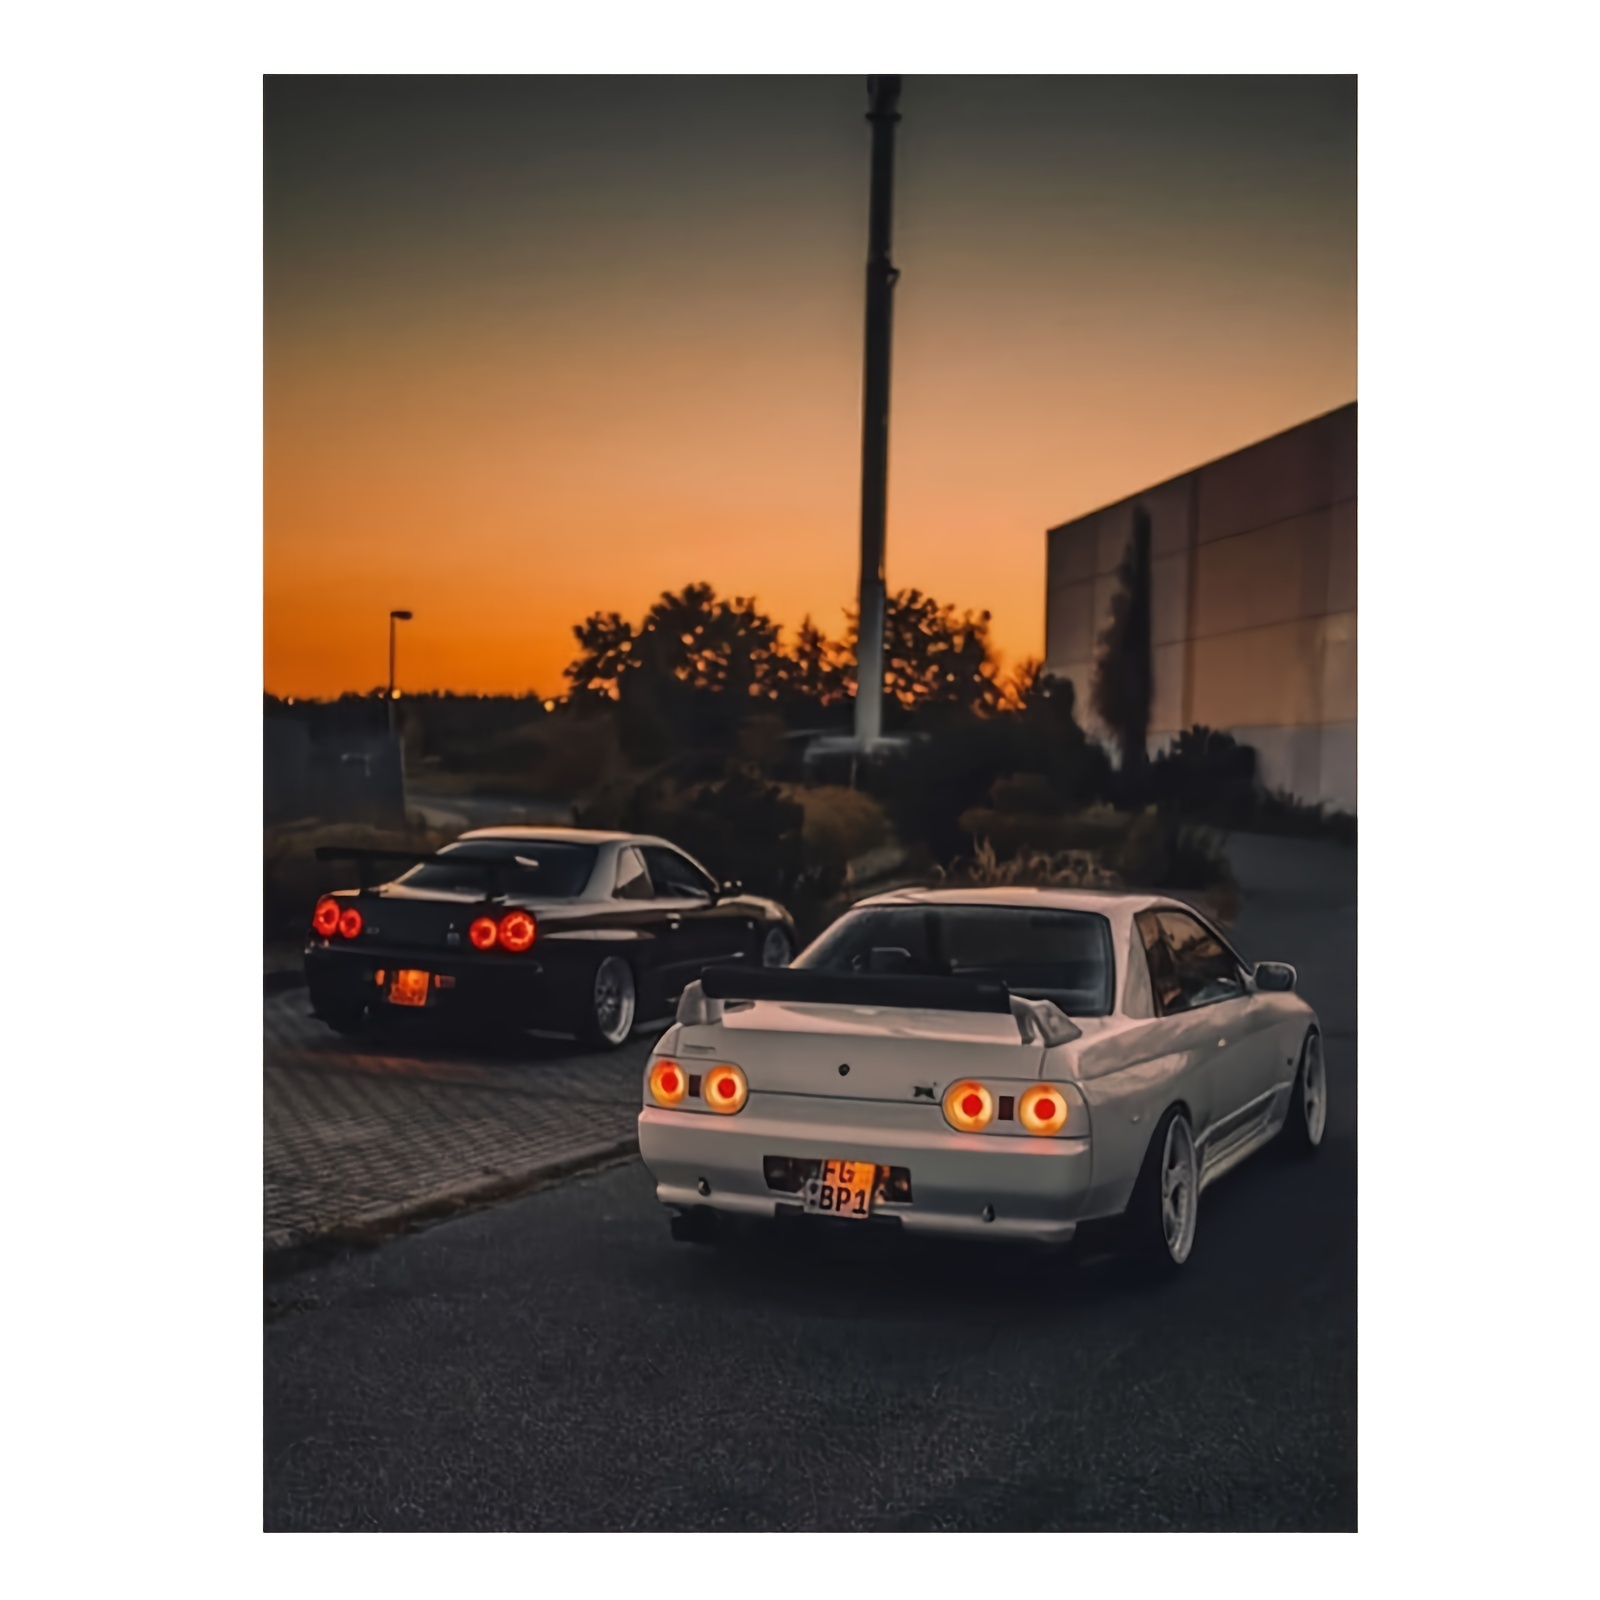 

Skyline Car Canvas Art Poster Set, Unframed Wall Decor For Home, Office, And Bedroom, 12x16inch Soft Canvas Material, Waterproof, High-quality Print - 1 Piece